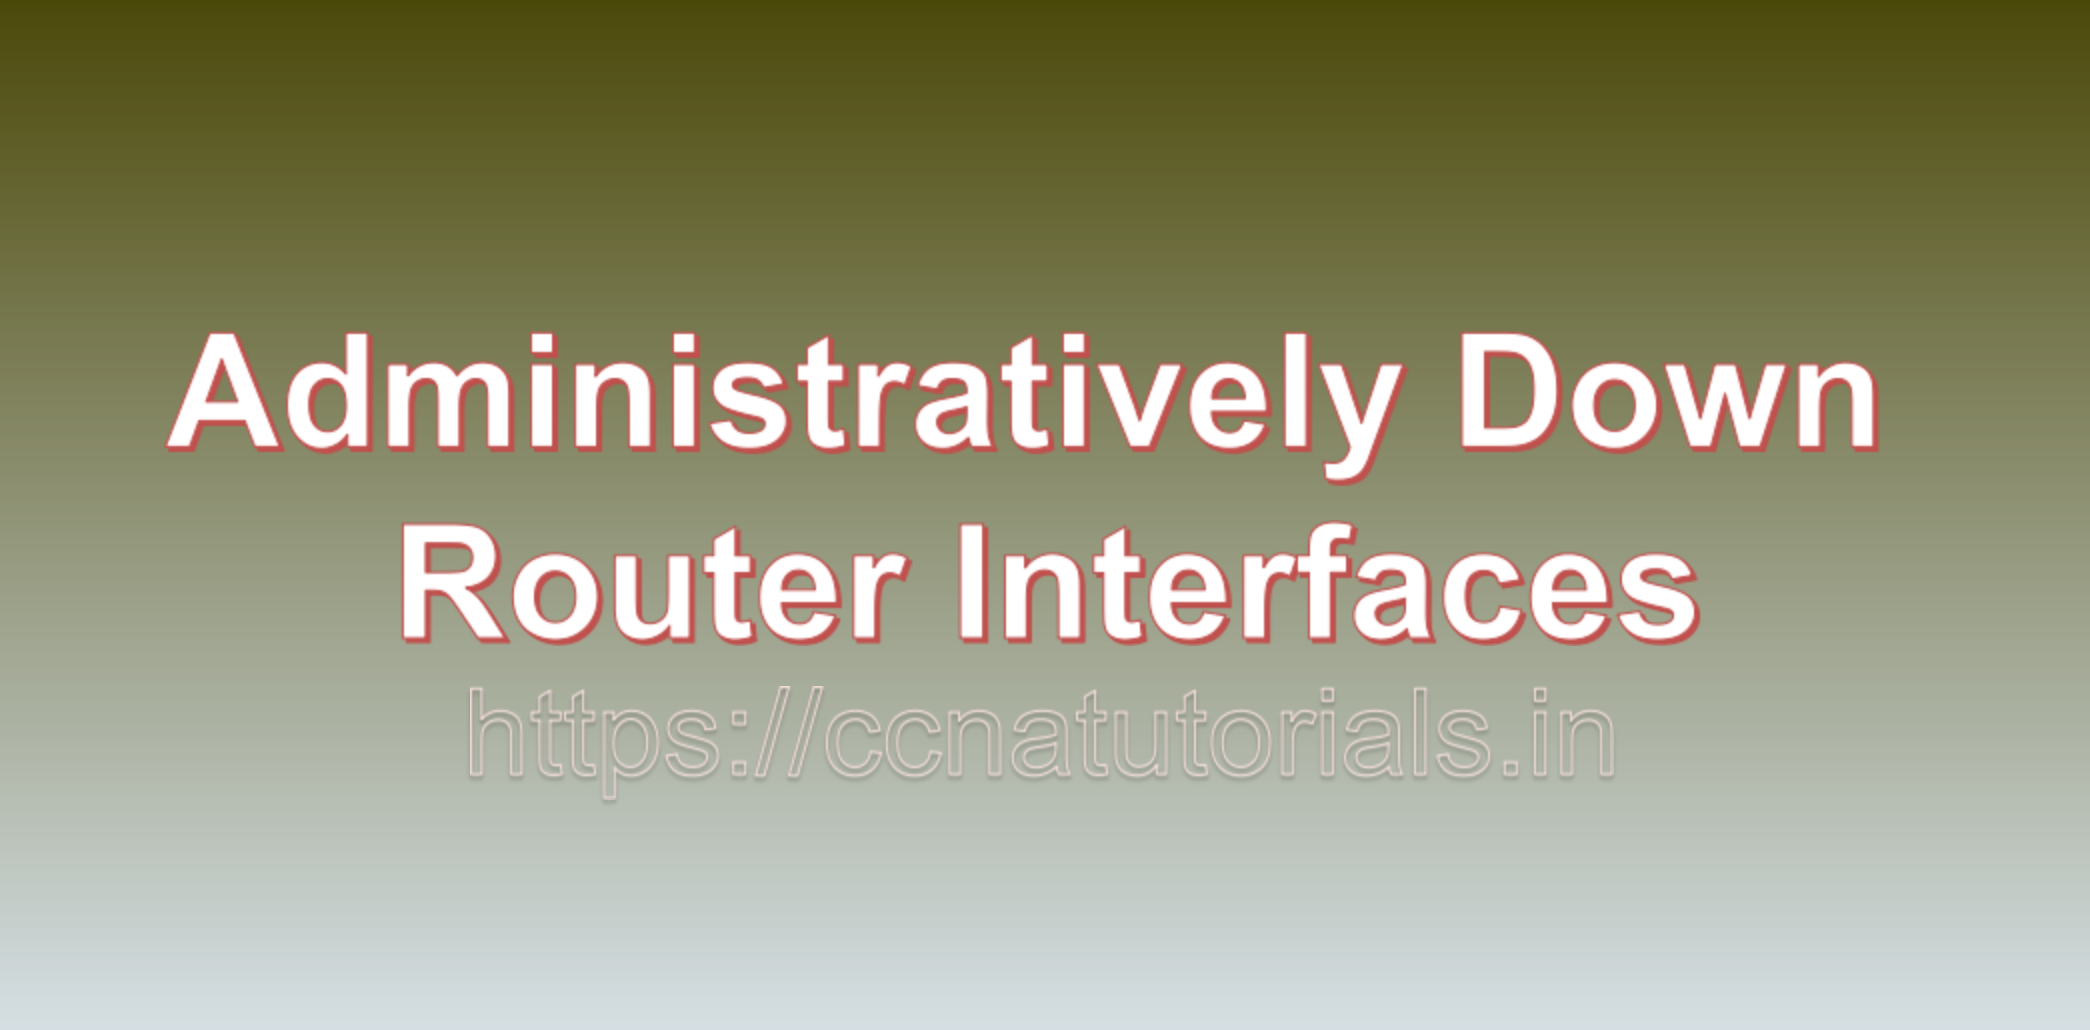 Administratively Down Router Interfaces, ccna, ccna tutorials